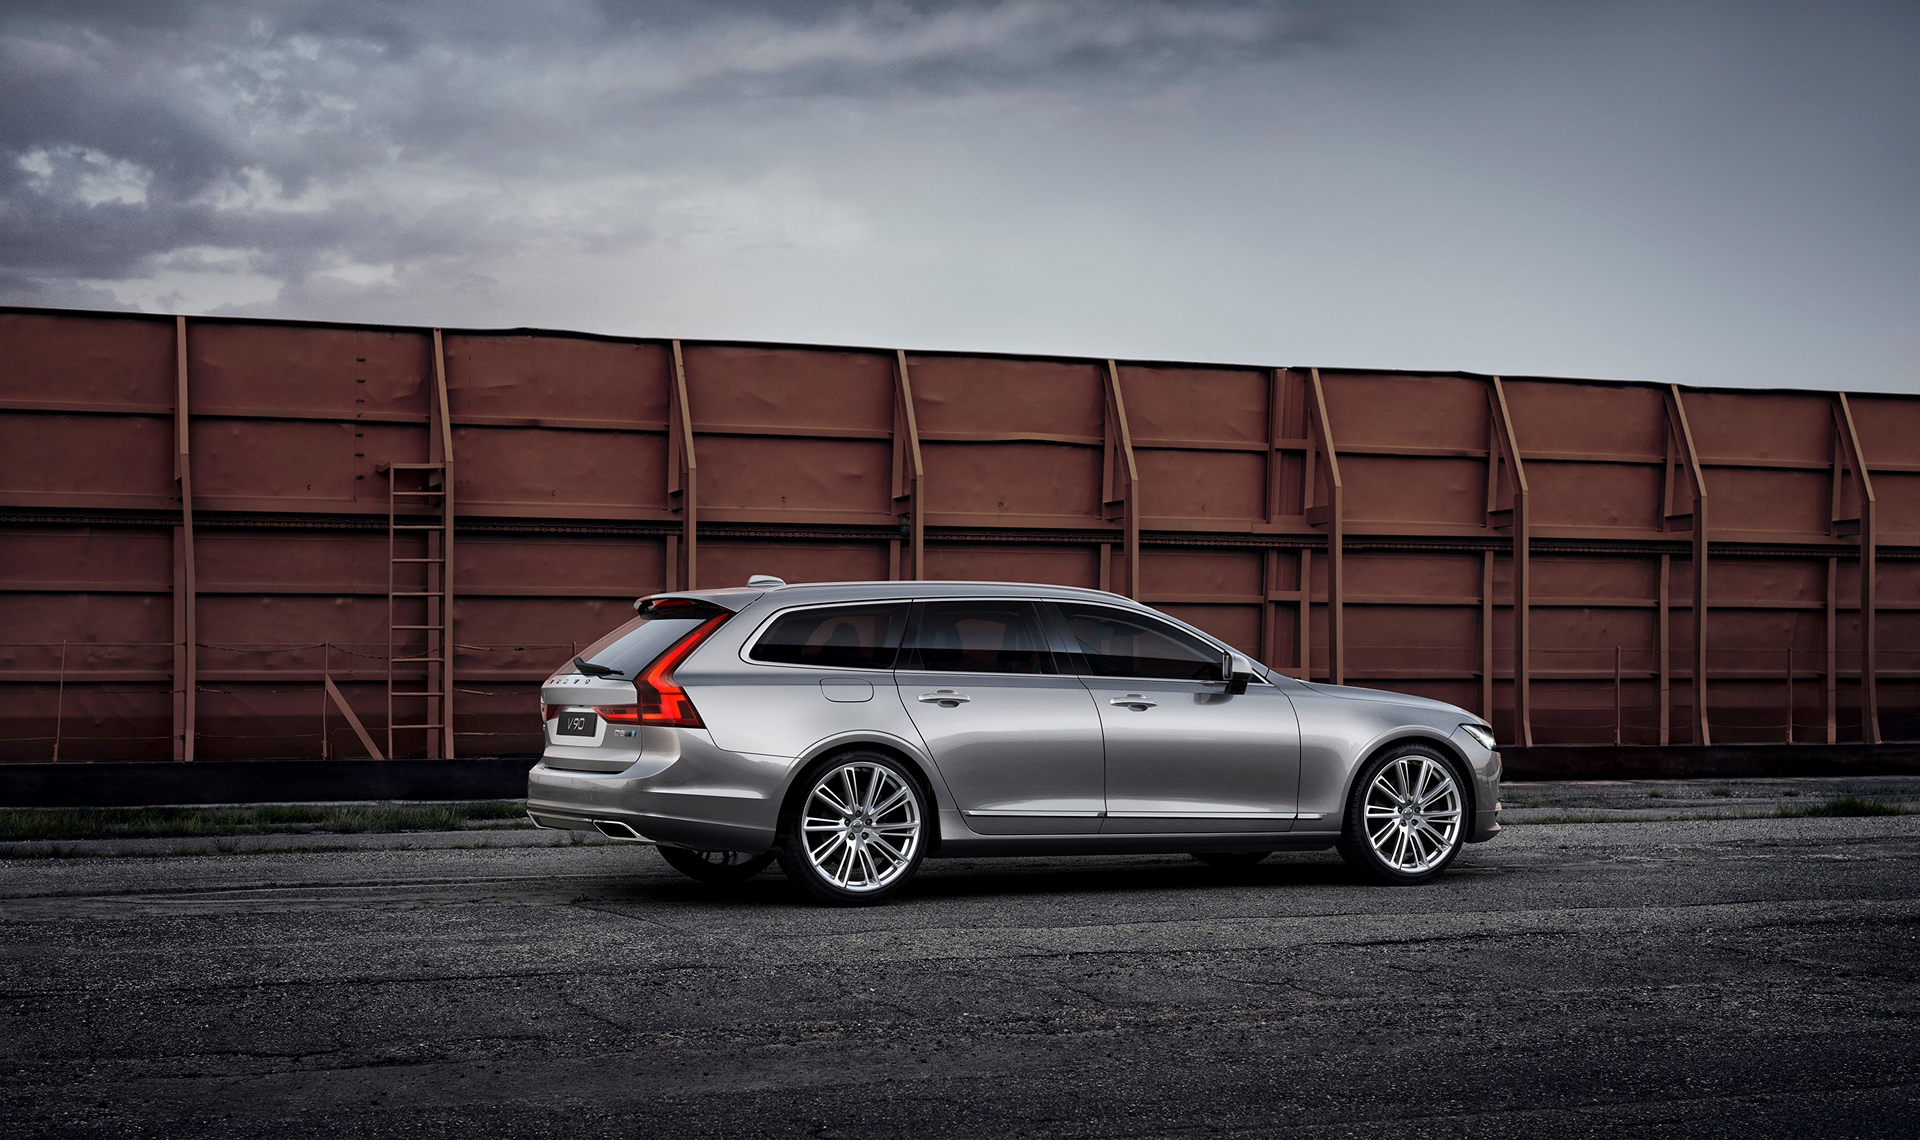 New Polestar performance package now available for the Volvo S90 and V90 © Zhejiang Geely Holding Group Co., Ltd